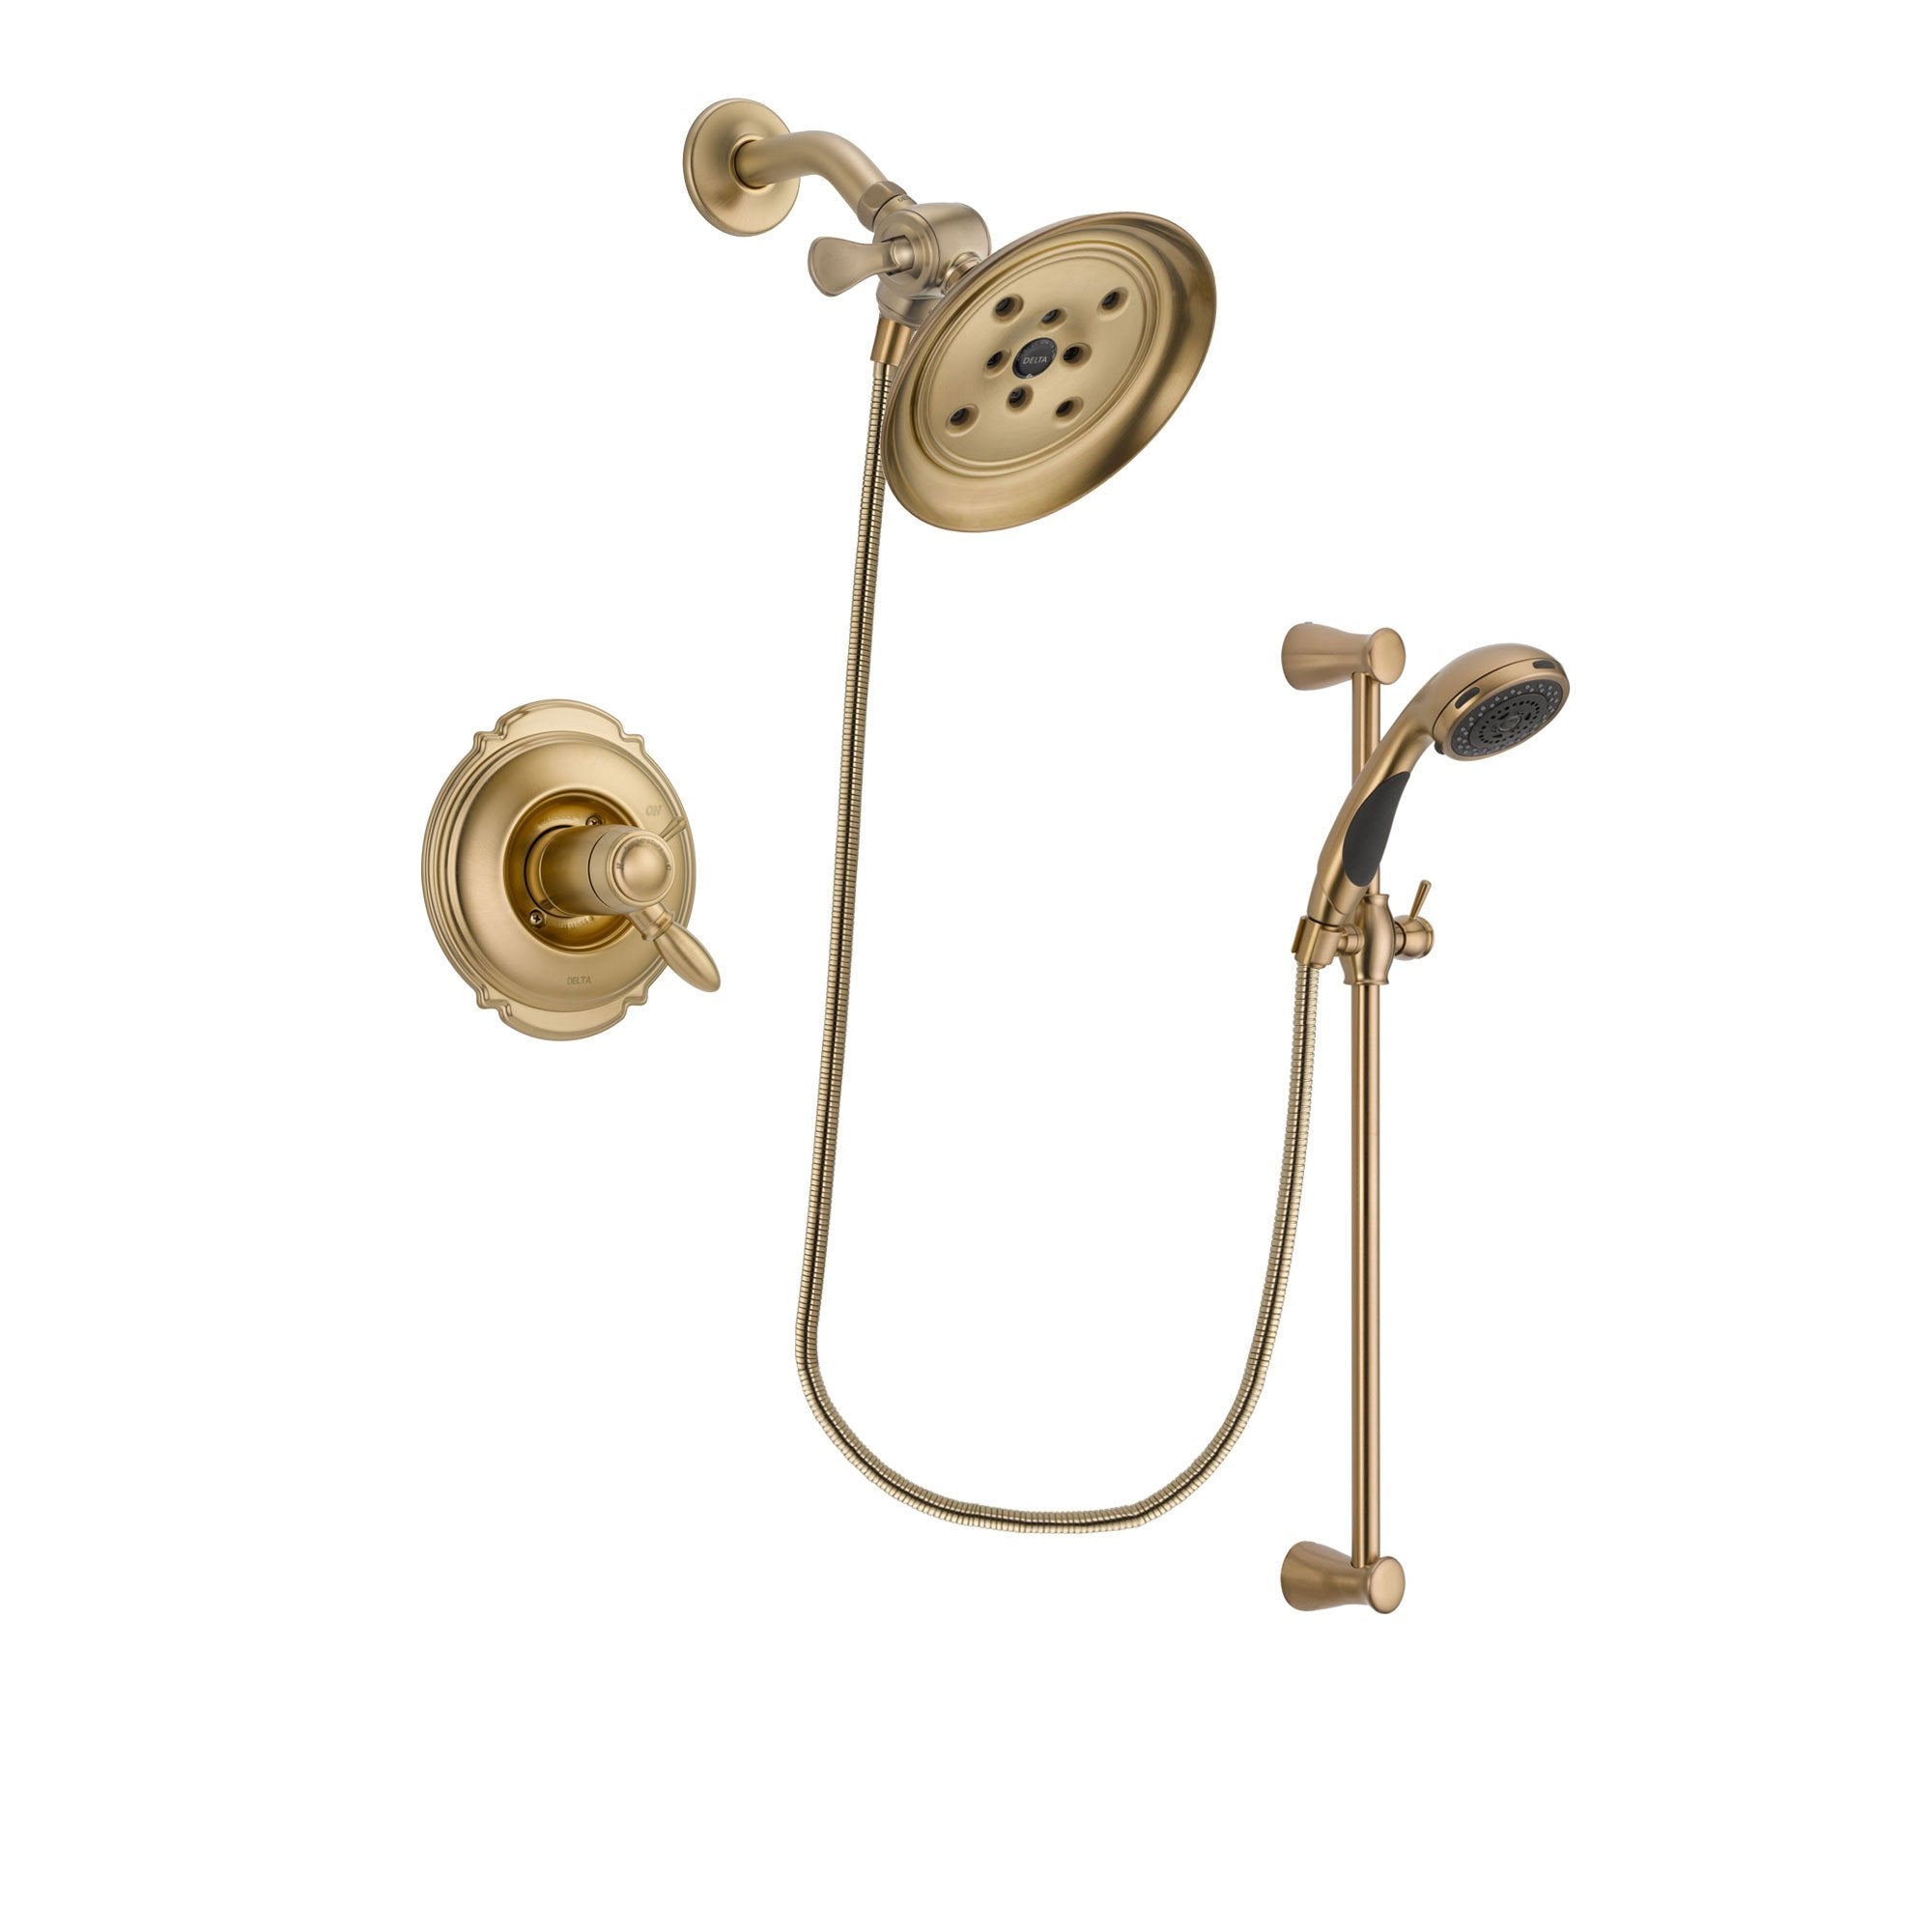 Delta Victorian Champagne Bronze Finish Thermostatic Shower Faucet System Package with Large Rain Shower Head and Personal Handheld Shower Sprayer with Slide Bar Includes Rough-in Valve DSP3476V